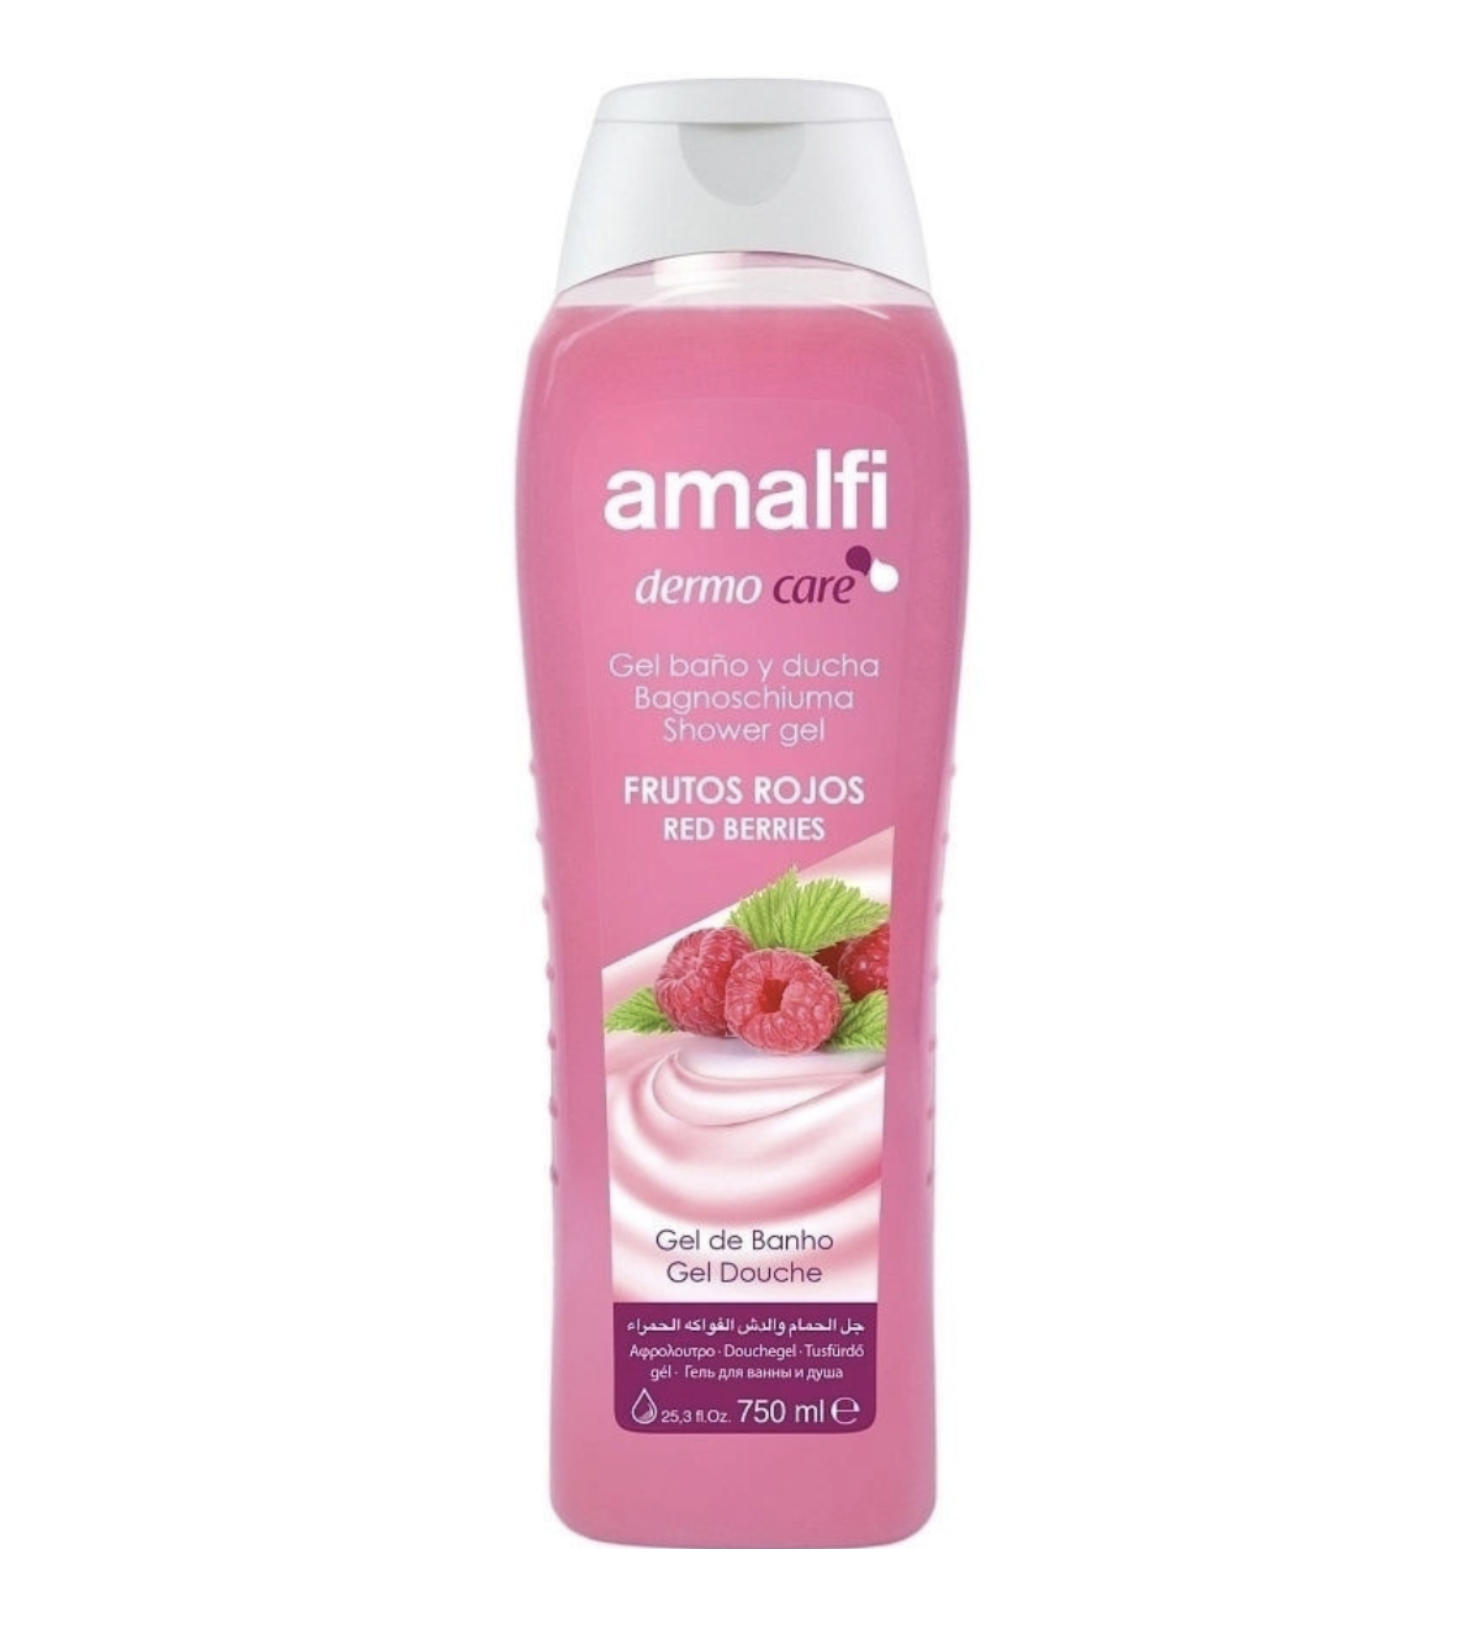   / Amalfi dermo care -      Red Berries 750 